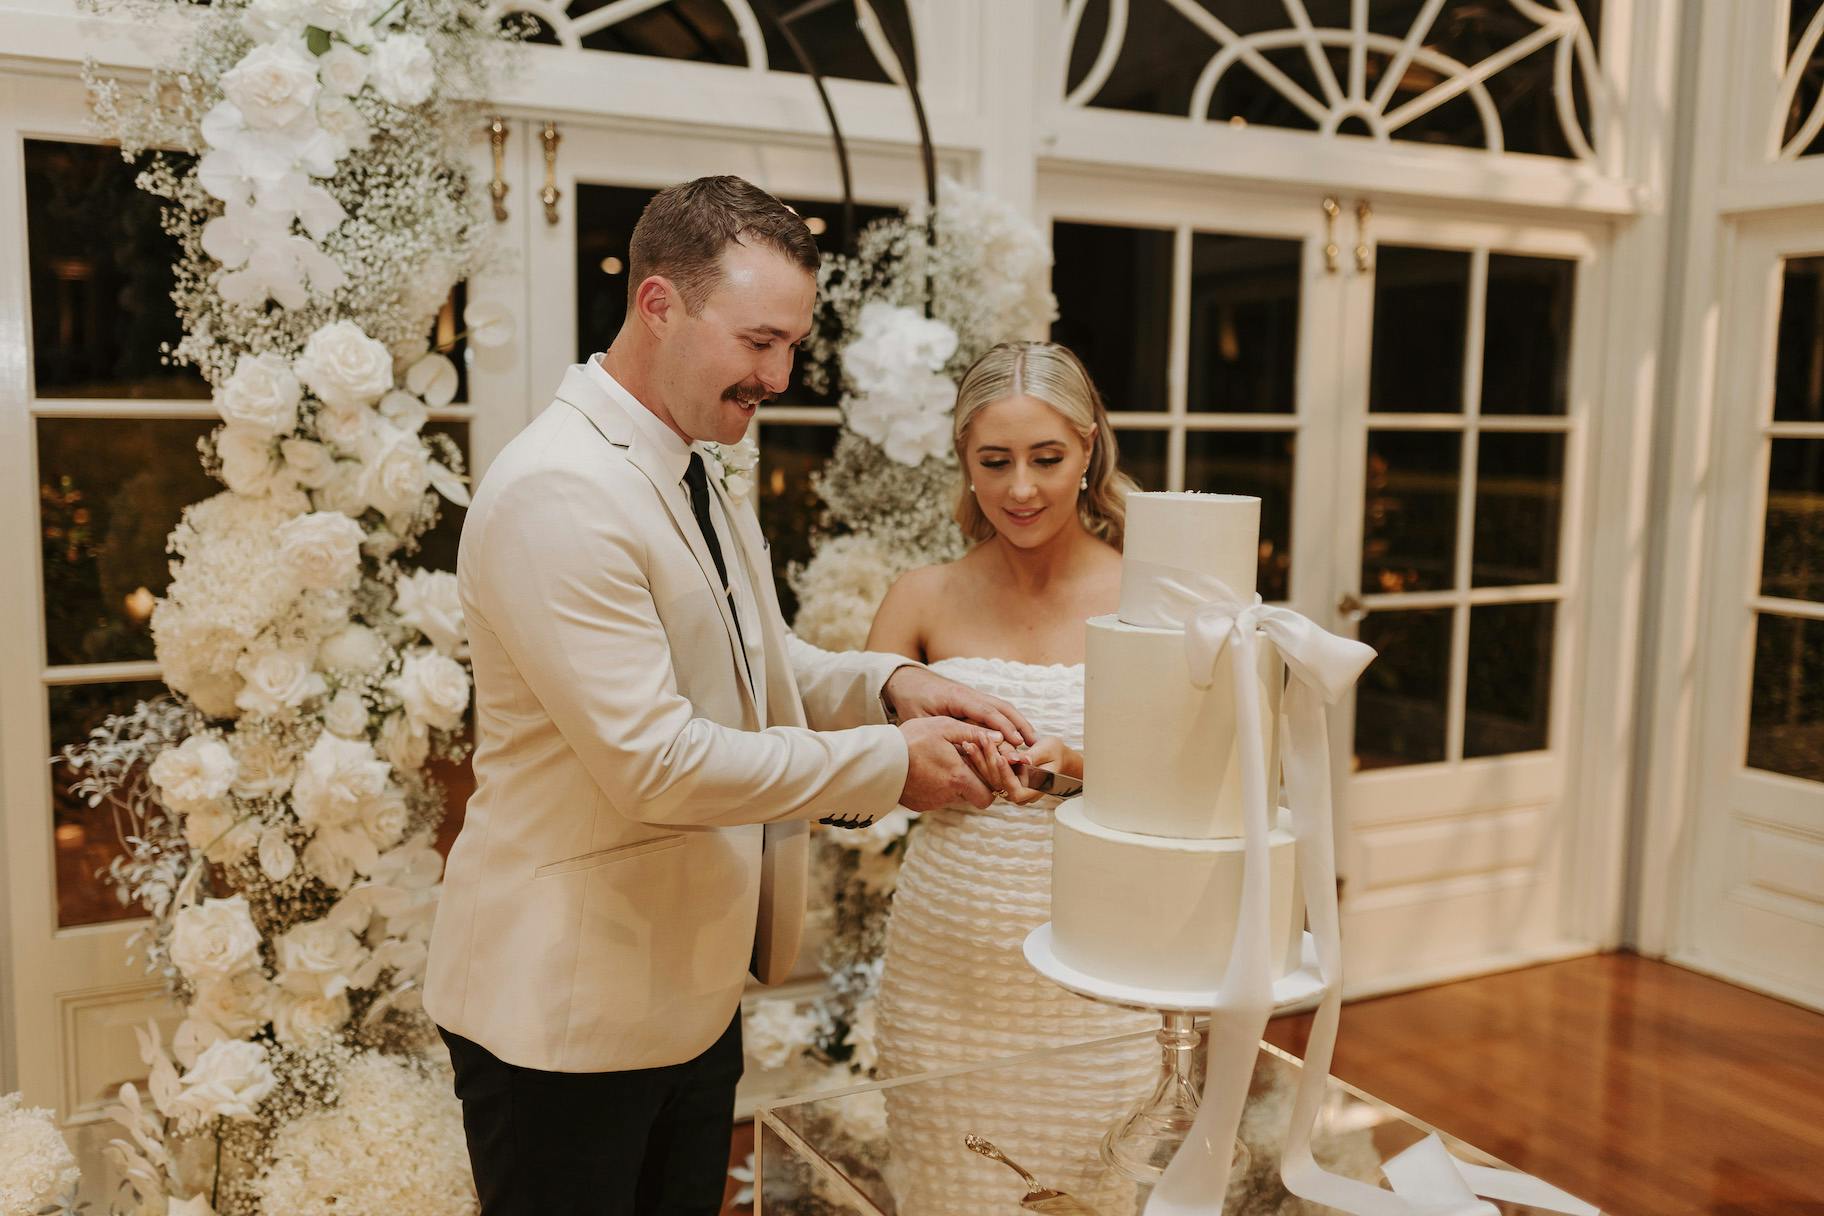 A bride and groom, both in white attire, stand in front of a tall, white wedding cake adorned with flowers and ribbons. The groom holds a cake knife while the bride touches his hand, both smiling as they prepare to cut the cake. A floral arch frames them in the background.